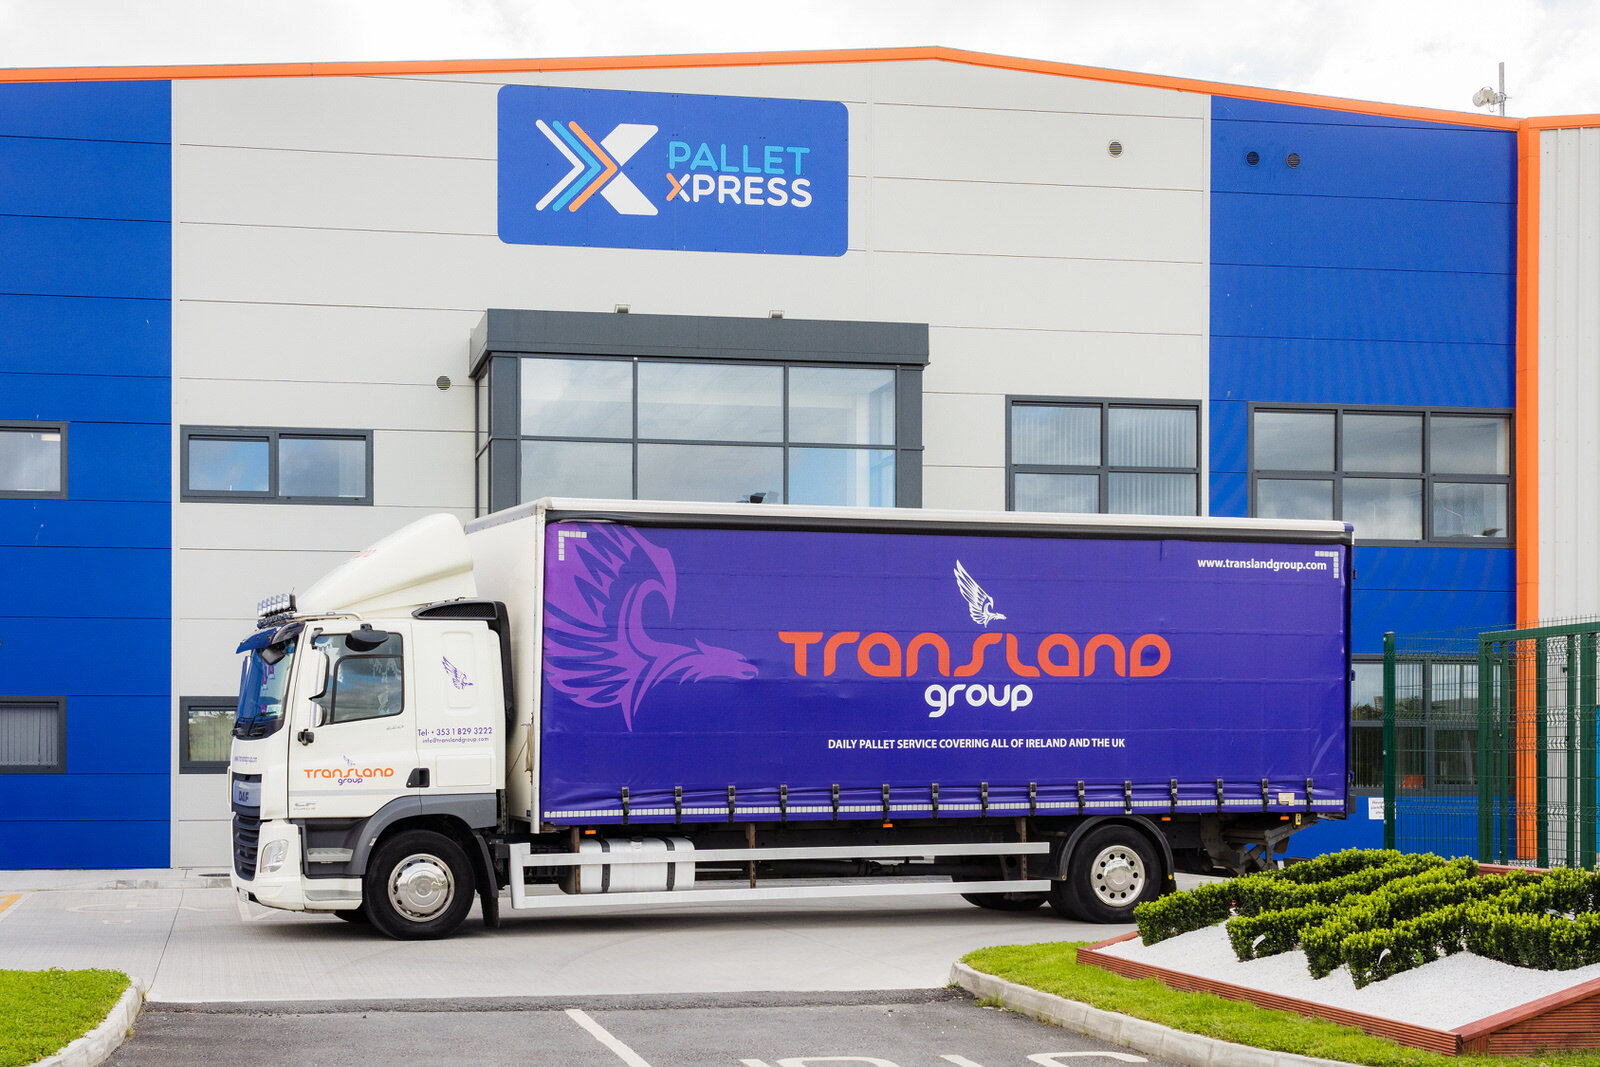  Transland Group Dublin Ireland commercial industrial  corporate property photography by Roger Kenny. 